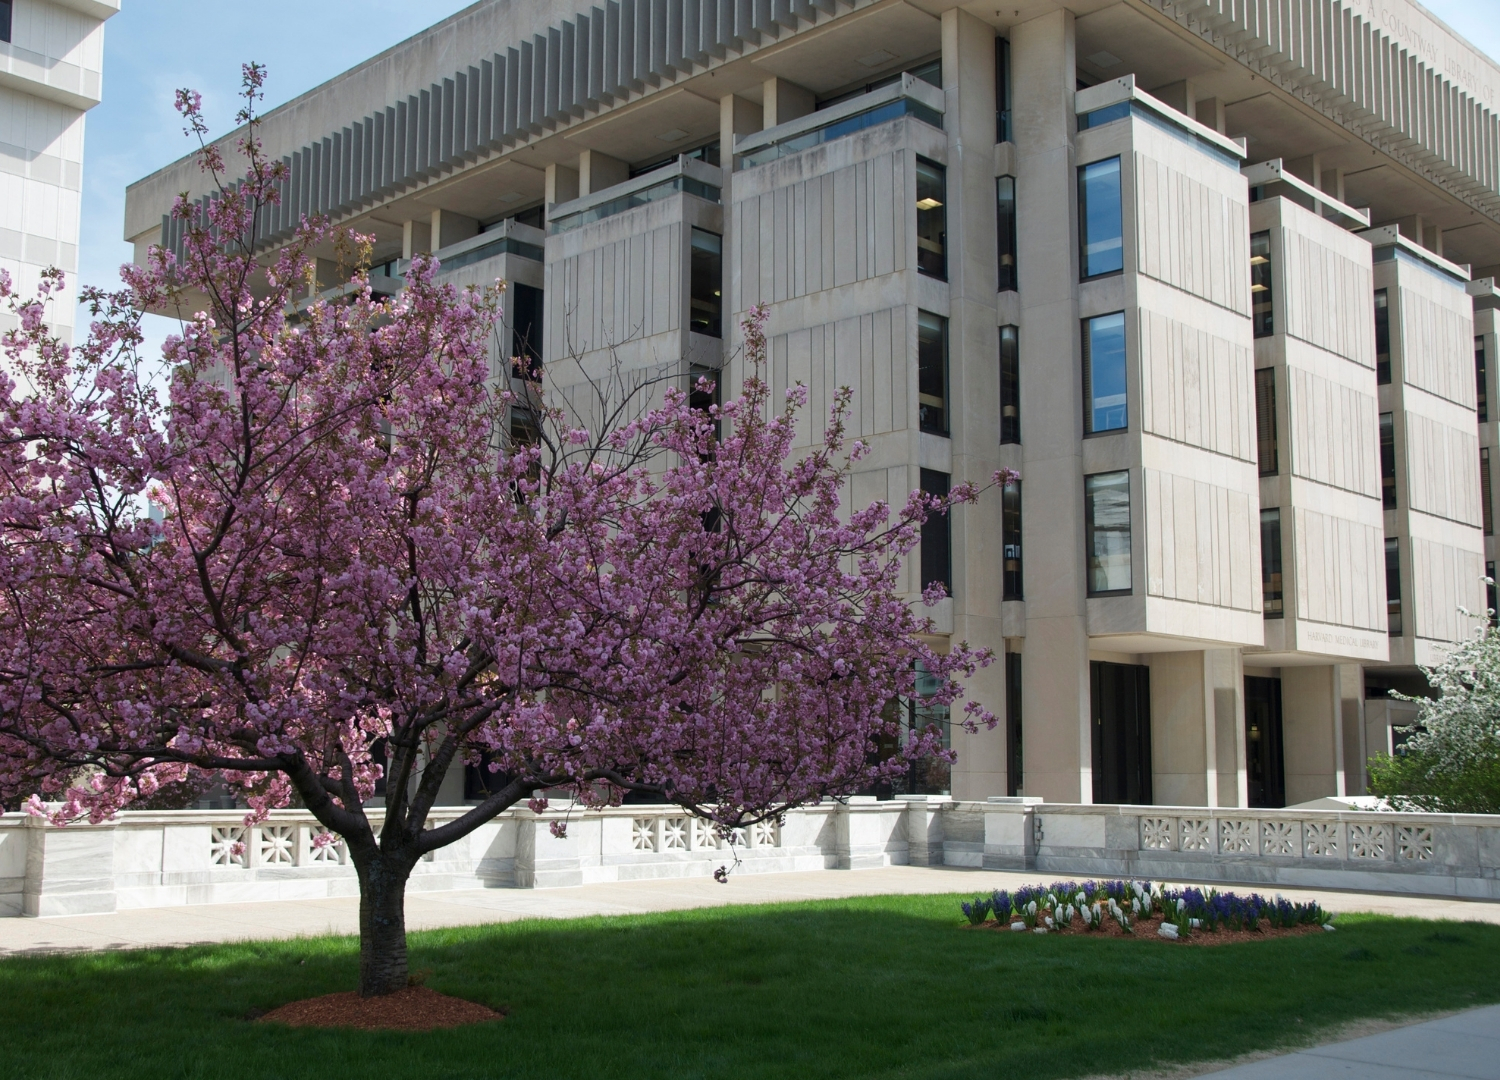 Countway library behind a flowering tree